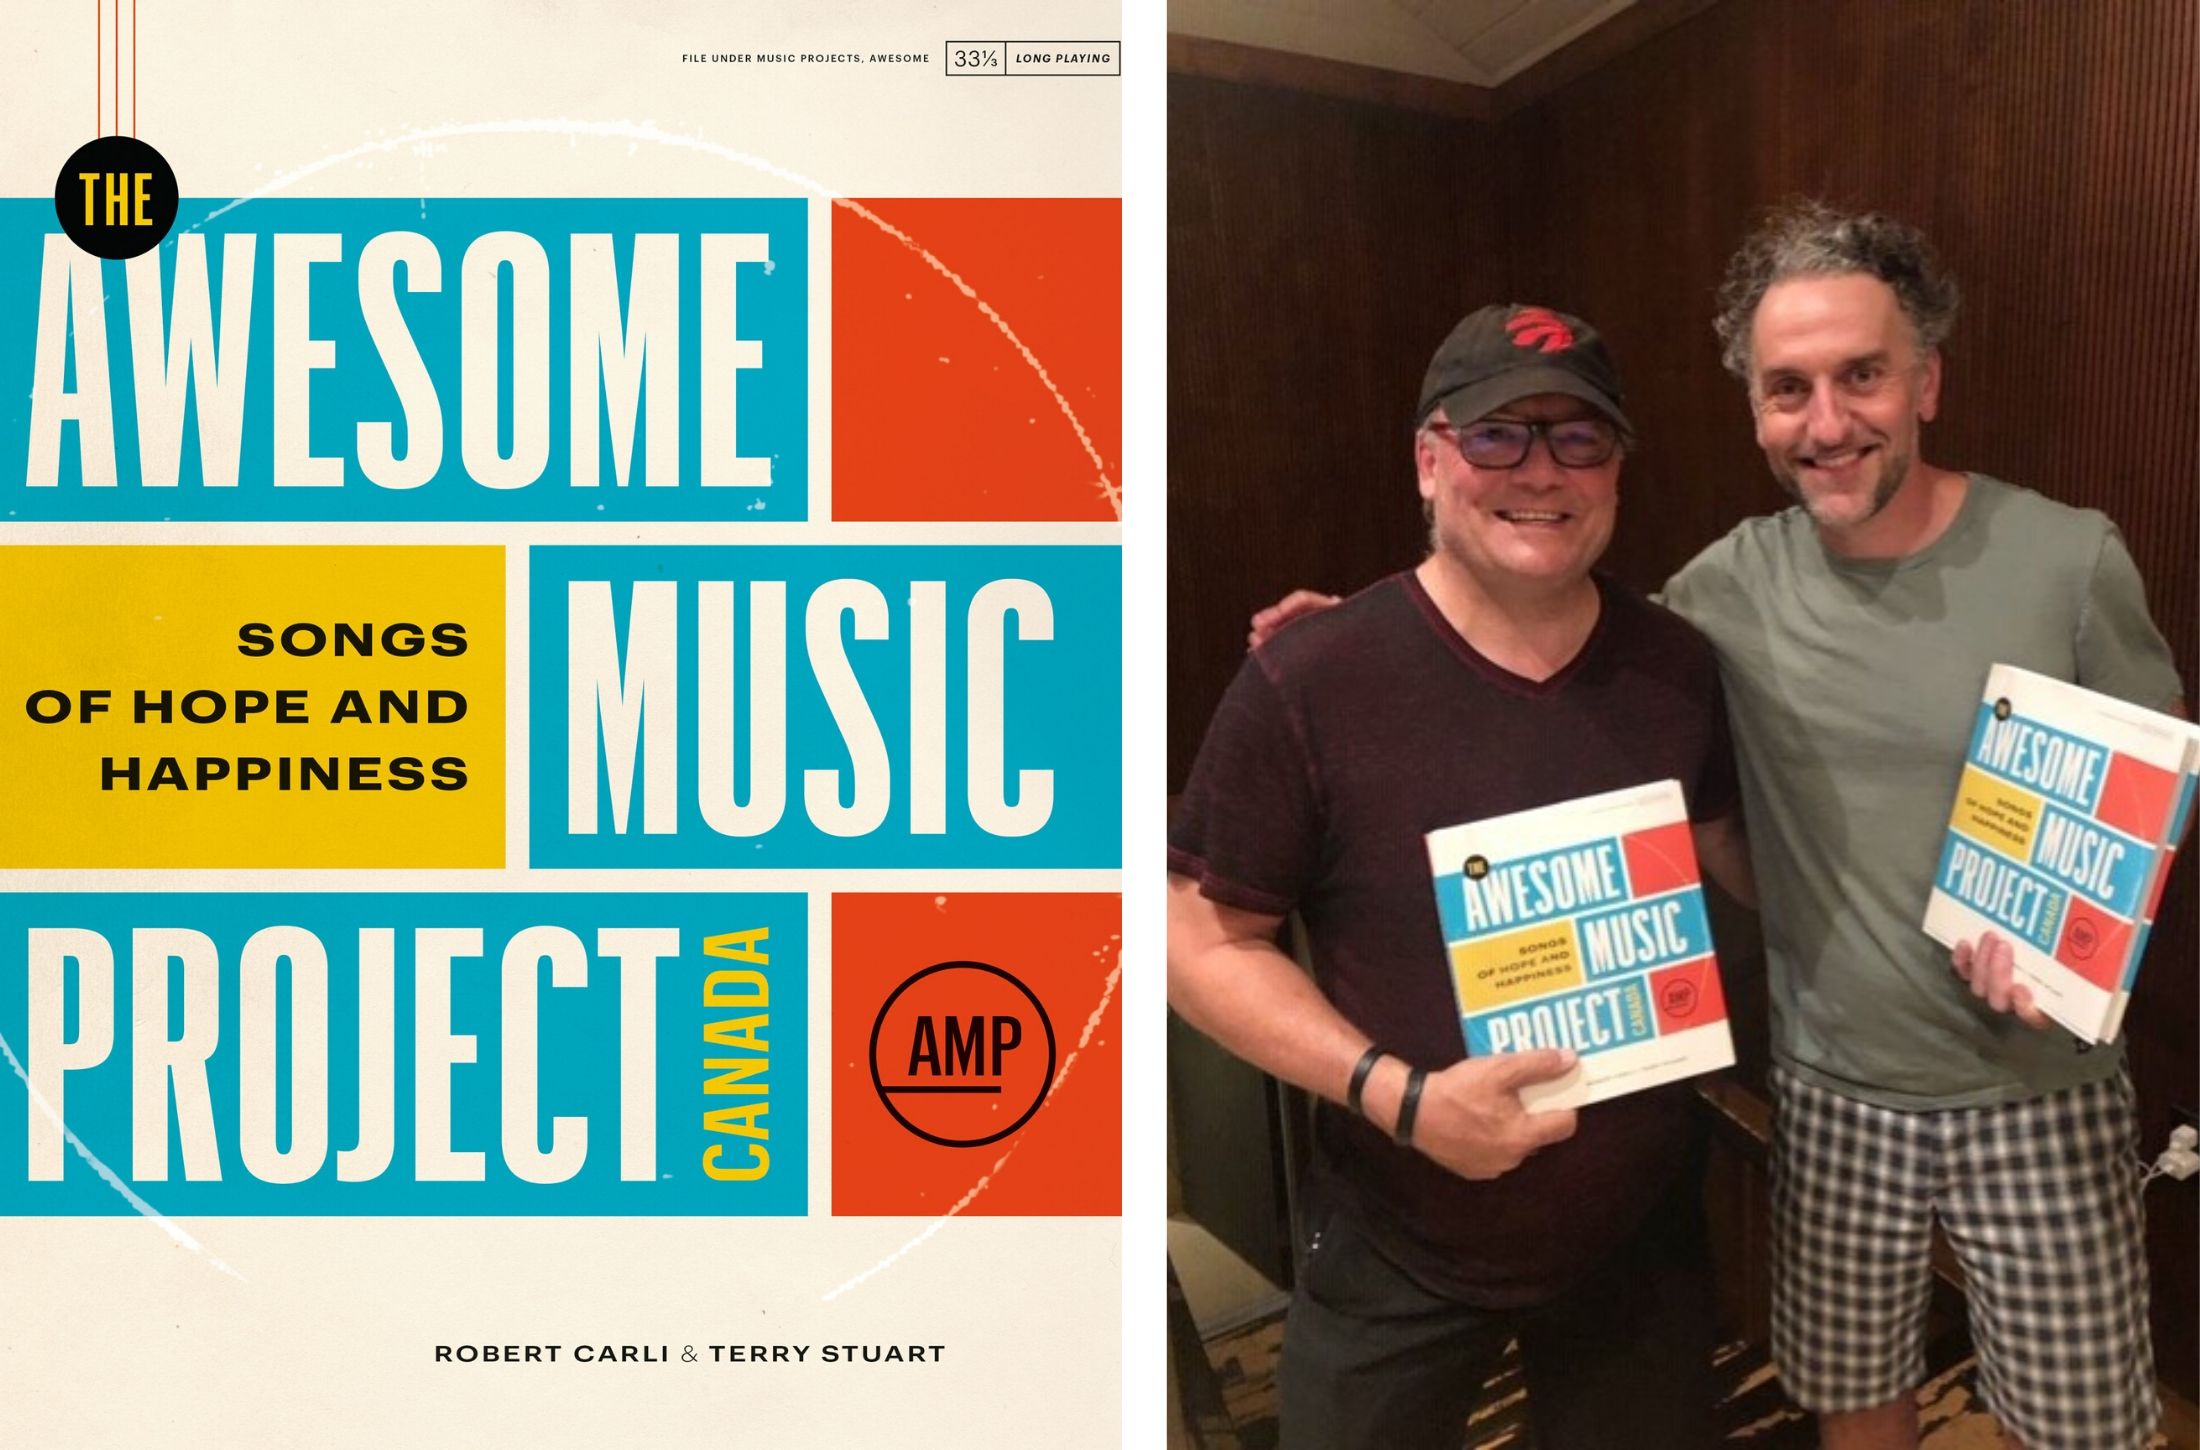 Co-authors Terry Stuart and Robert Carli. Courtesy of The Awesome Music Project.